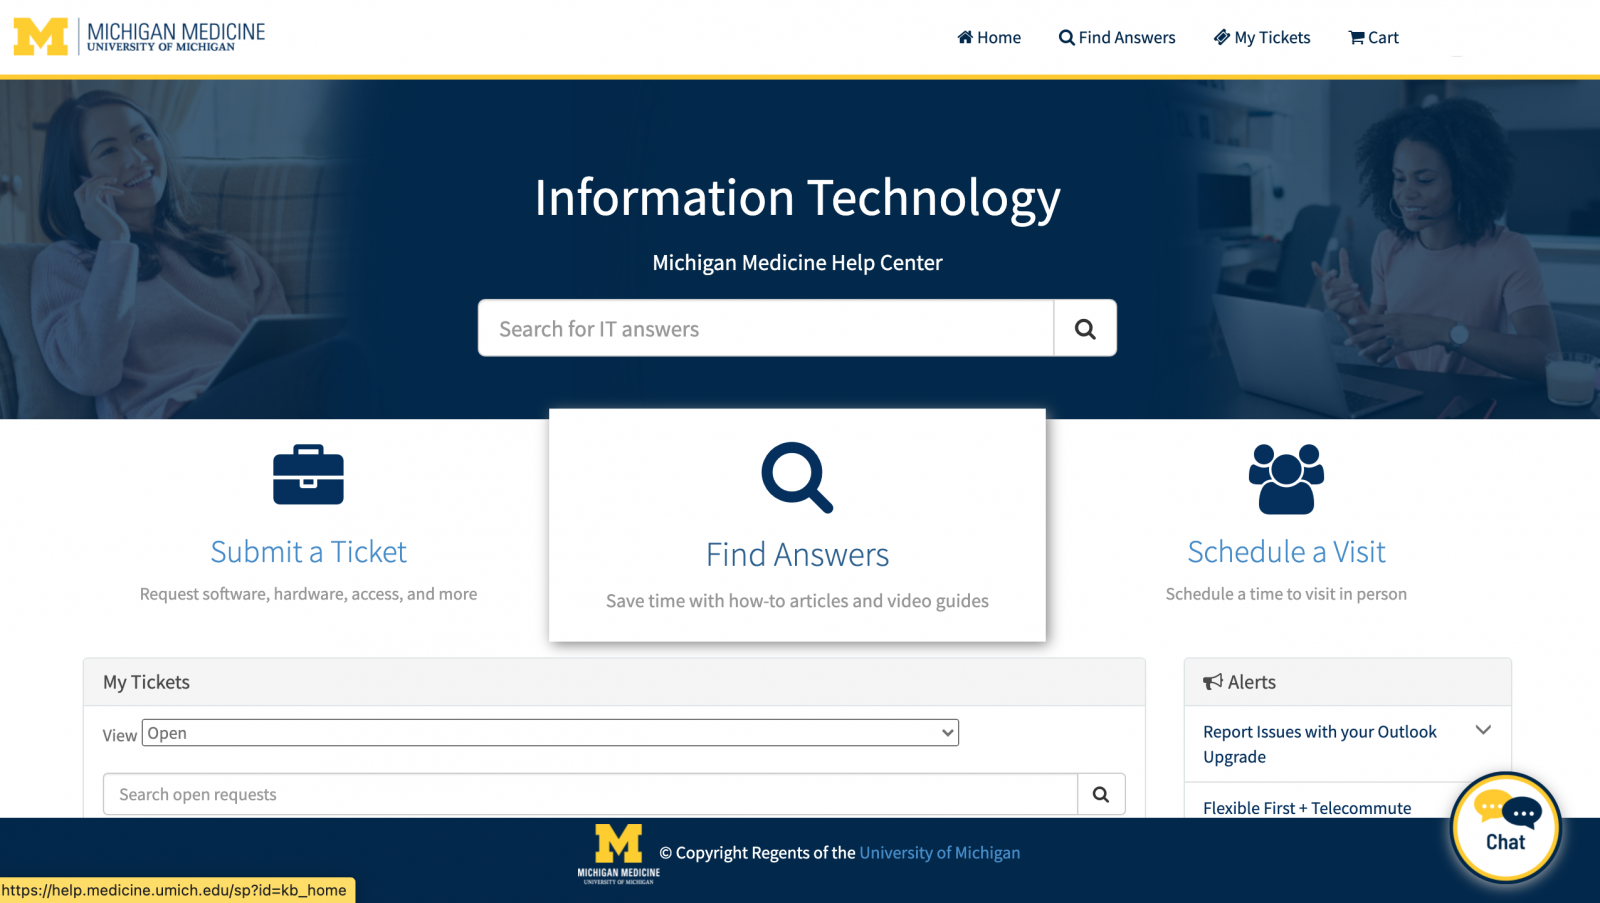 IT Help Center has a new look and updated navigation